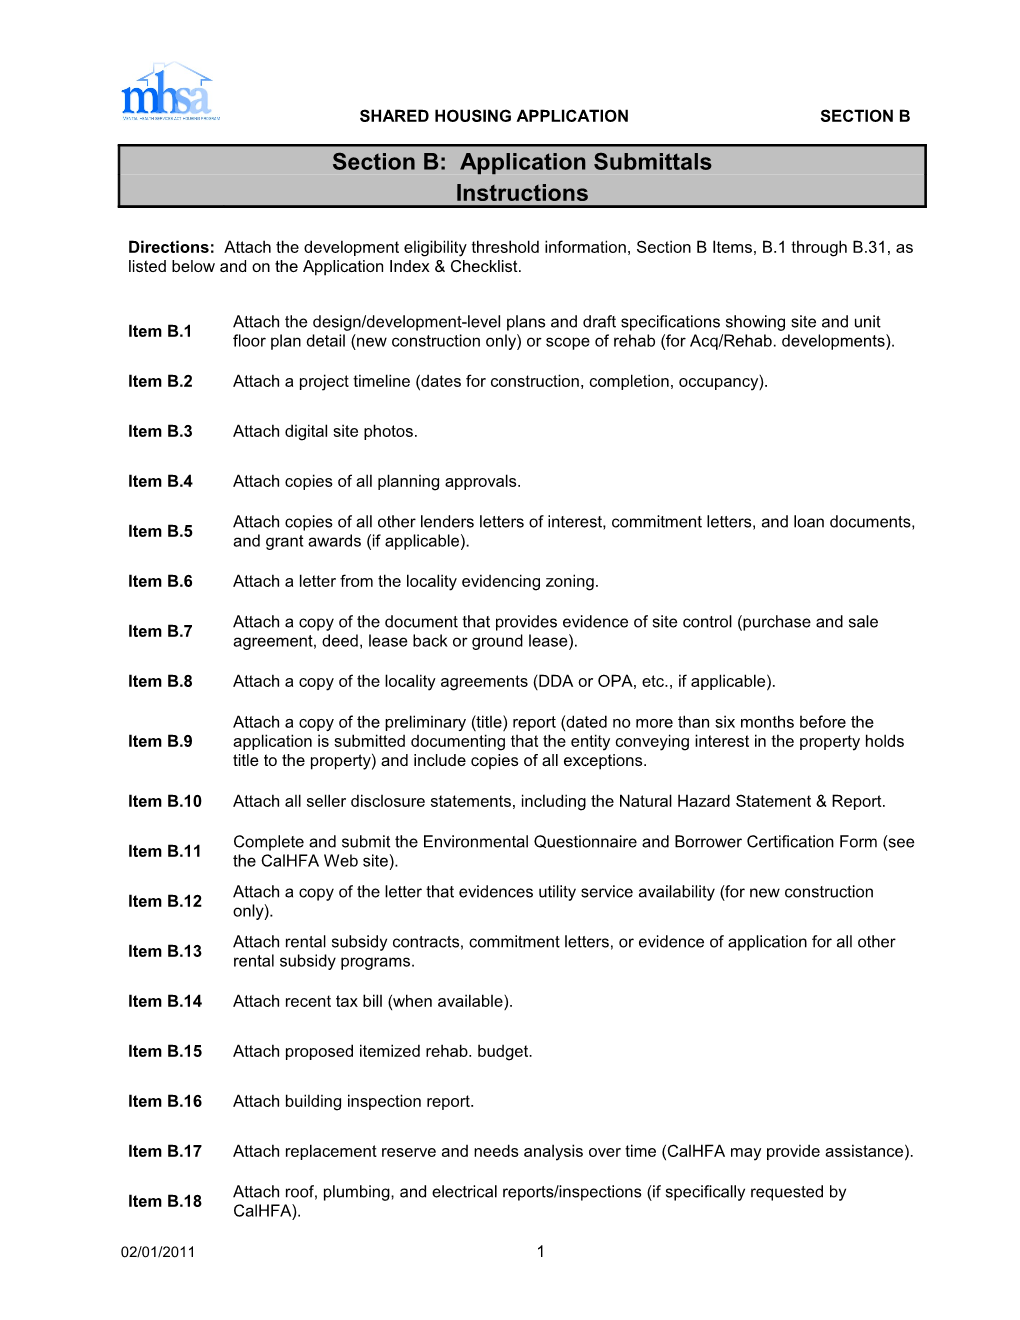 Section B: Application Submittals